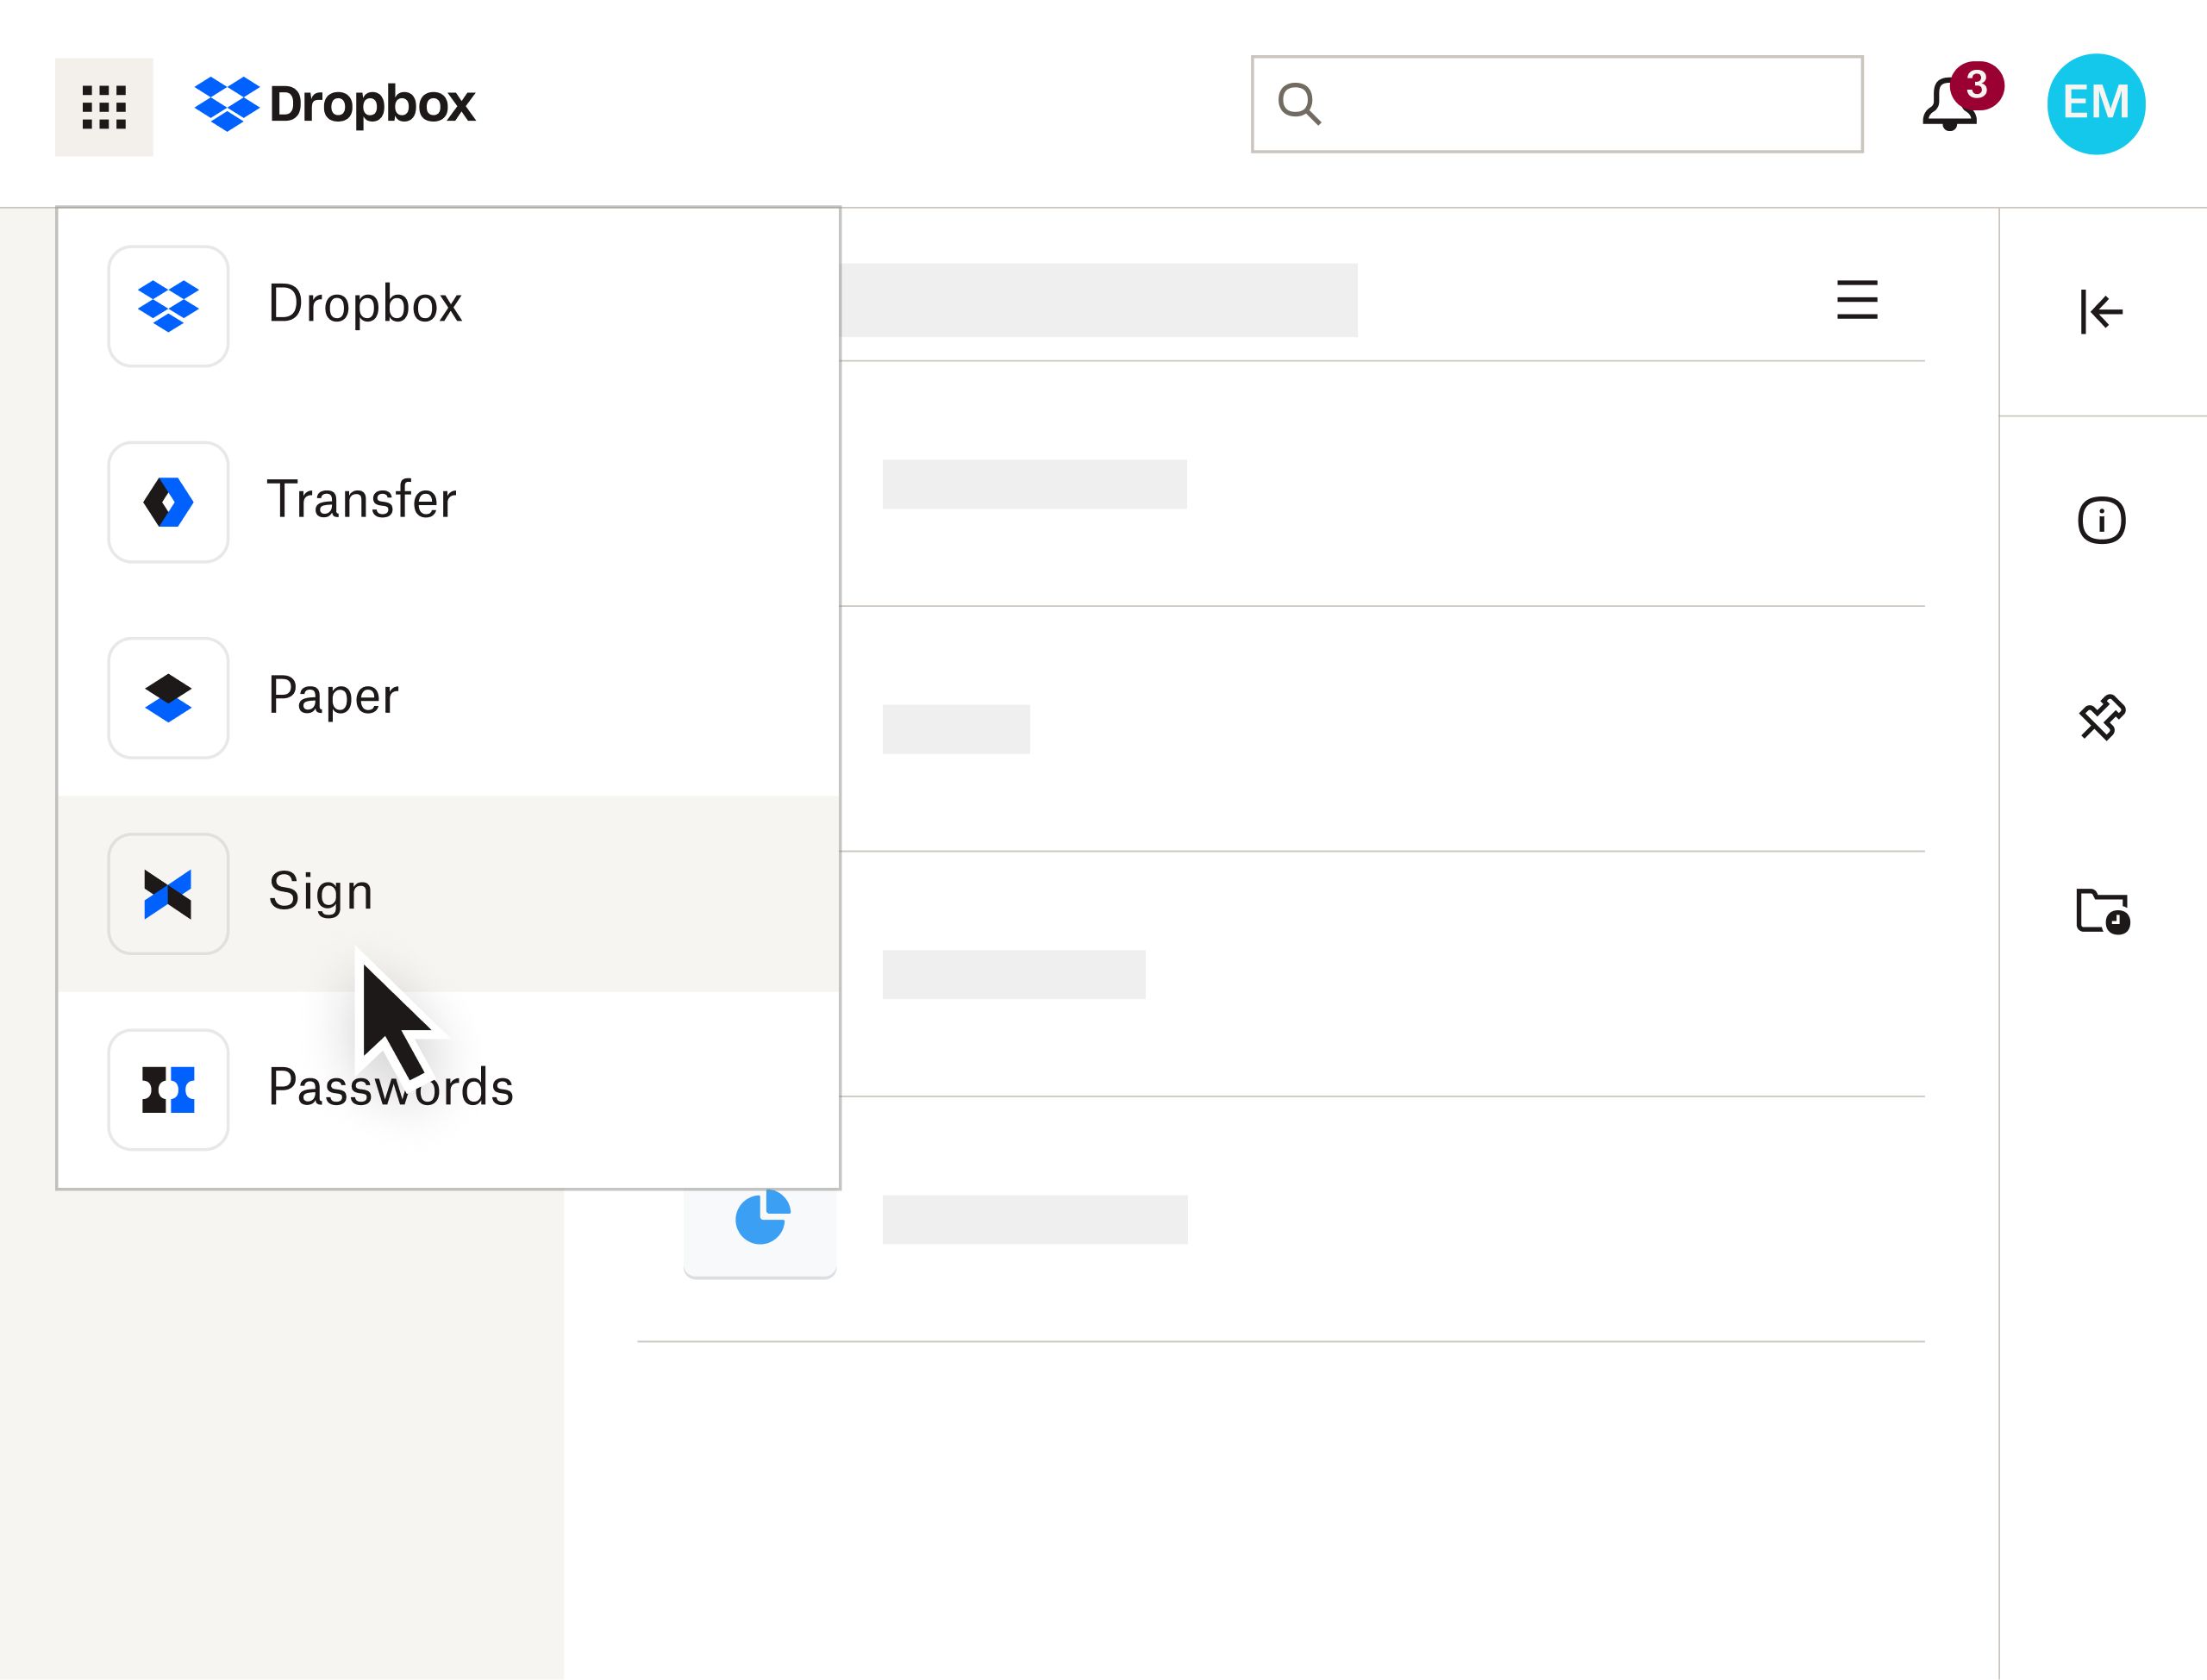 The Dropbox interface with a user selecting Sign from a product drop-down menu